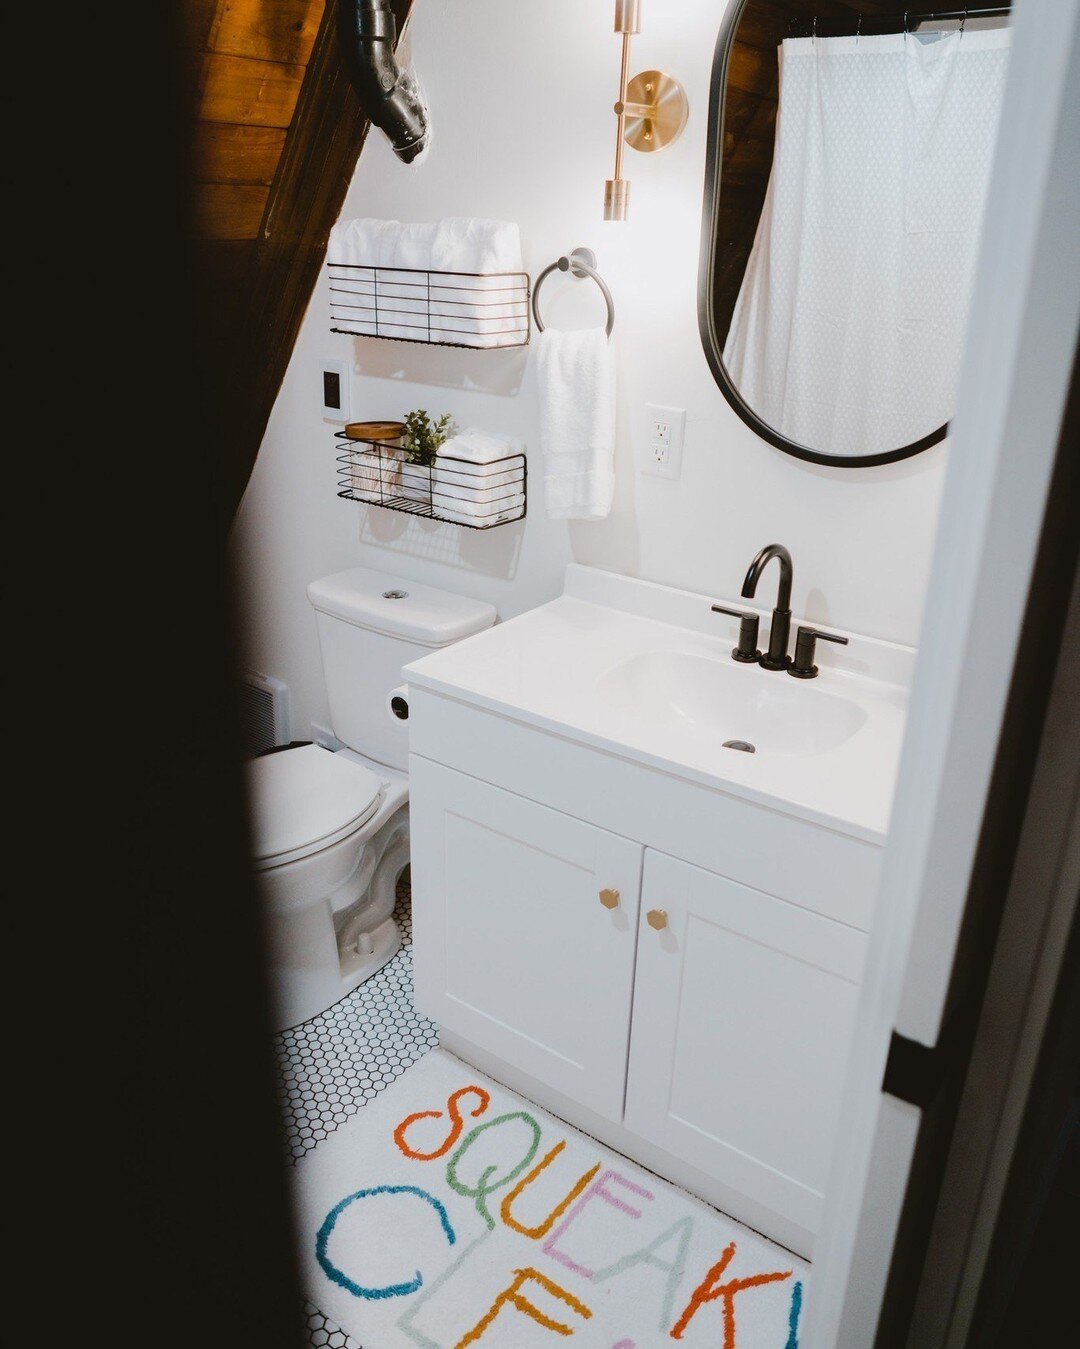 Remodeling an A-frame bathroom always feels like a game of tetris. Challenging and fun! The vanity in this bathroom used to be under the sink, with no mirror, I love how it turned out. What do you think?

Don't forget to click our link in bio to find